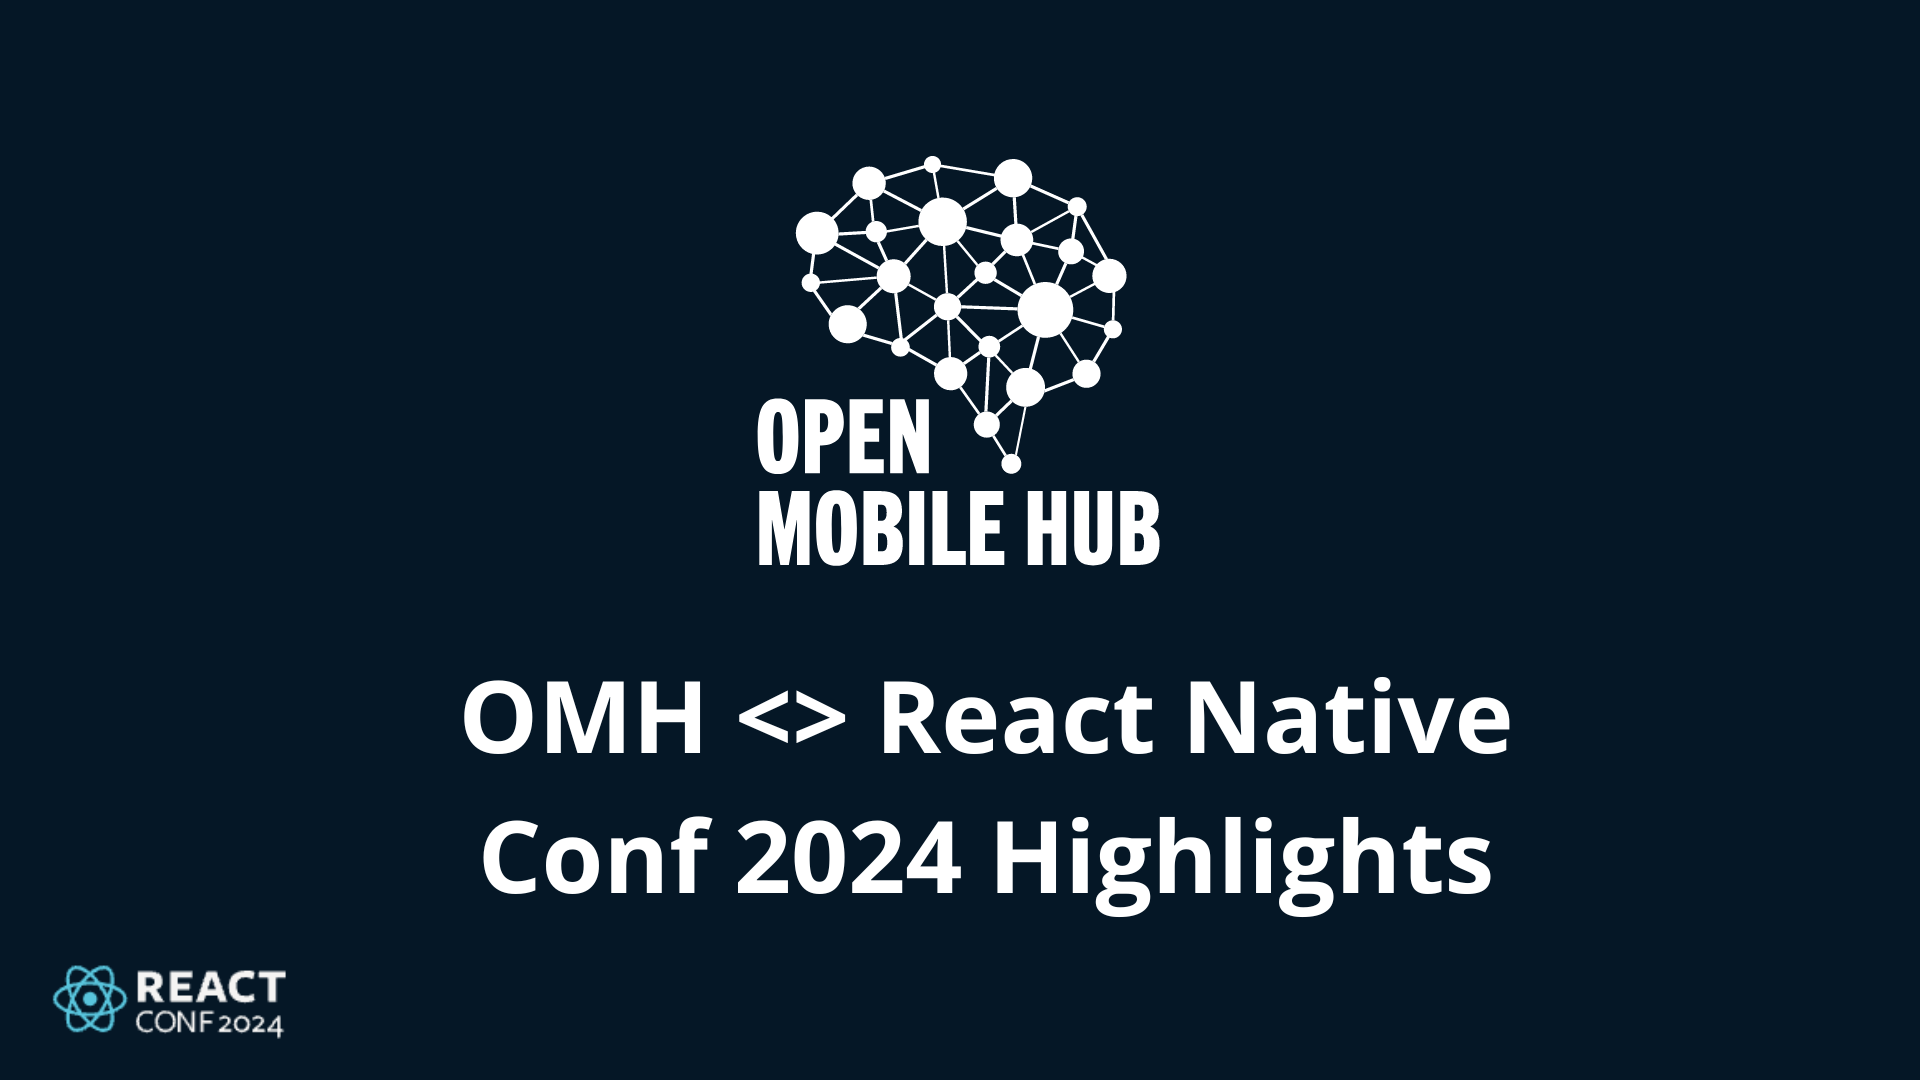 OMH <> React Native: Exciting Times Ahead at React Conf 2024